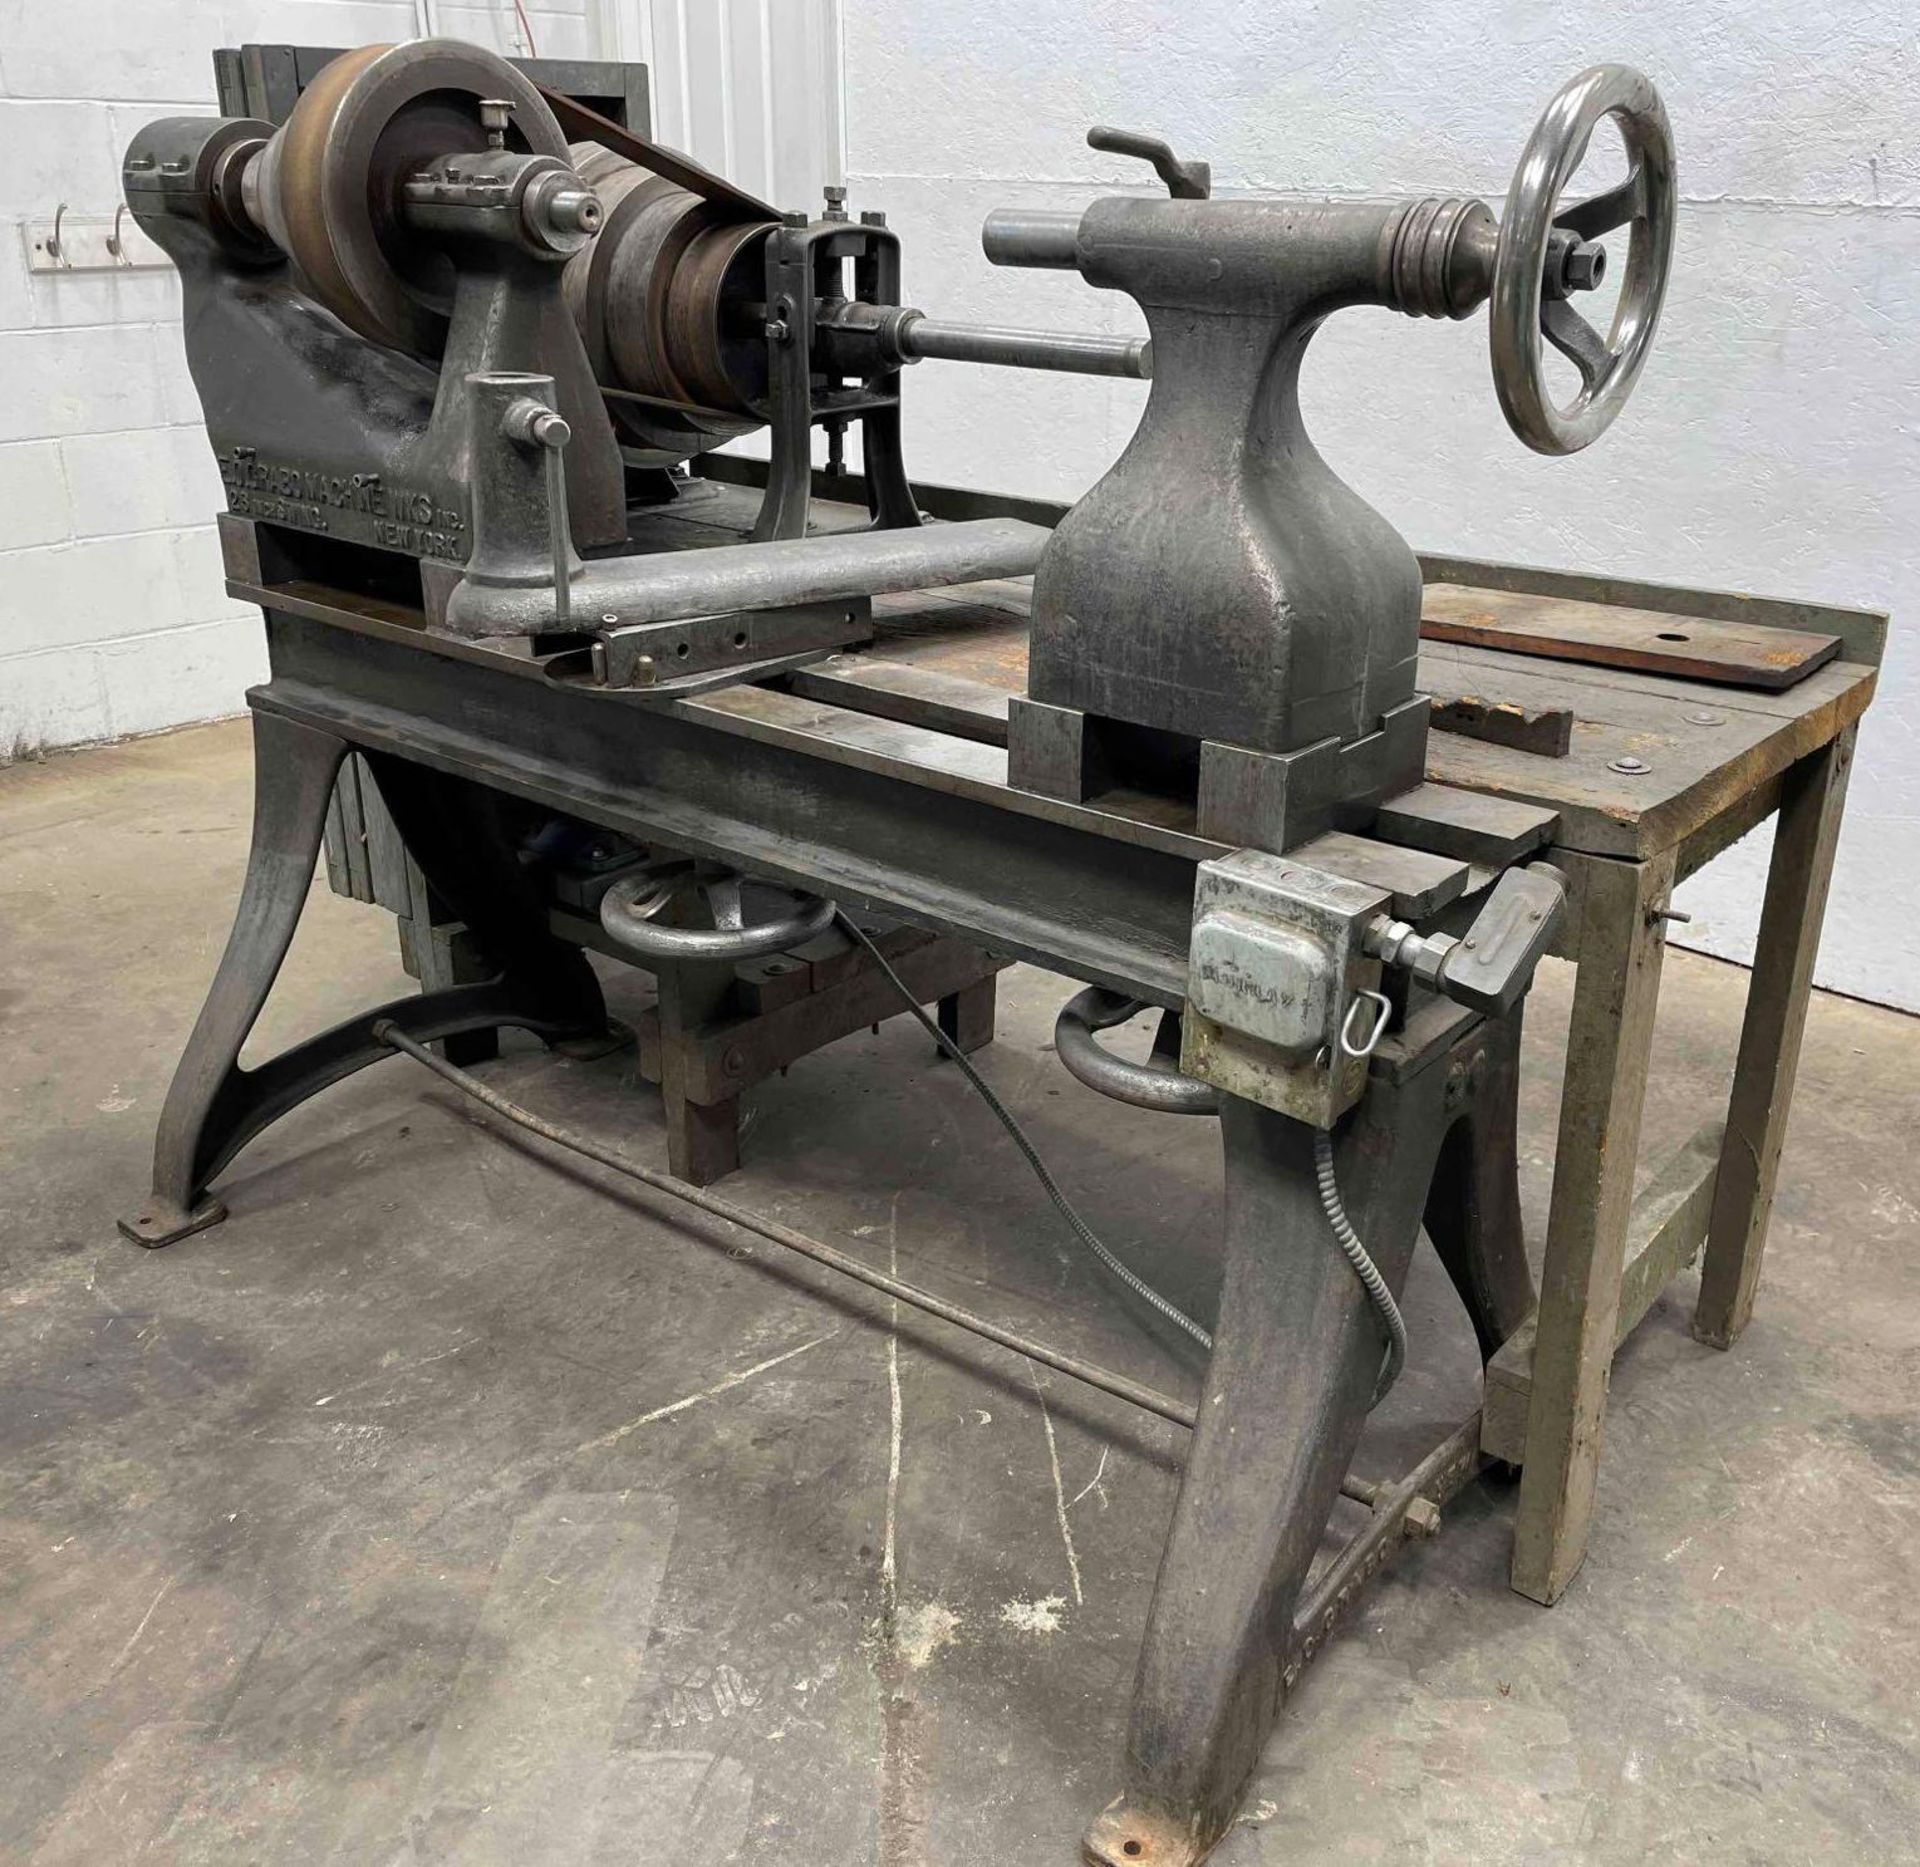 E.O.Grabo Machine Wks Spinning Lathe, 26 in Swing, 24" Between Centers, 1.5 HP, 1 Phase, 208V   $50 - Image 2 of 19